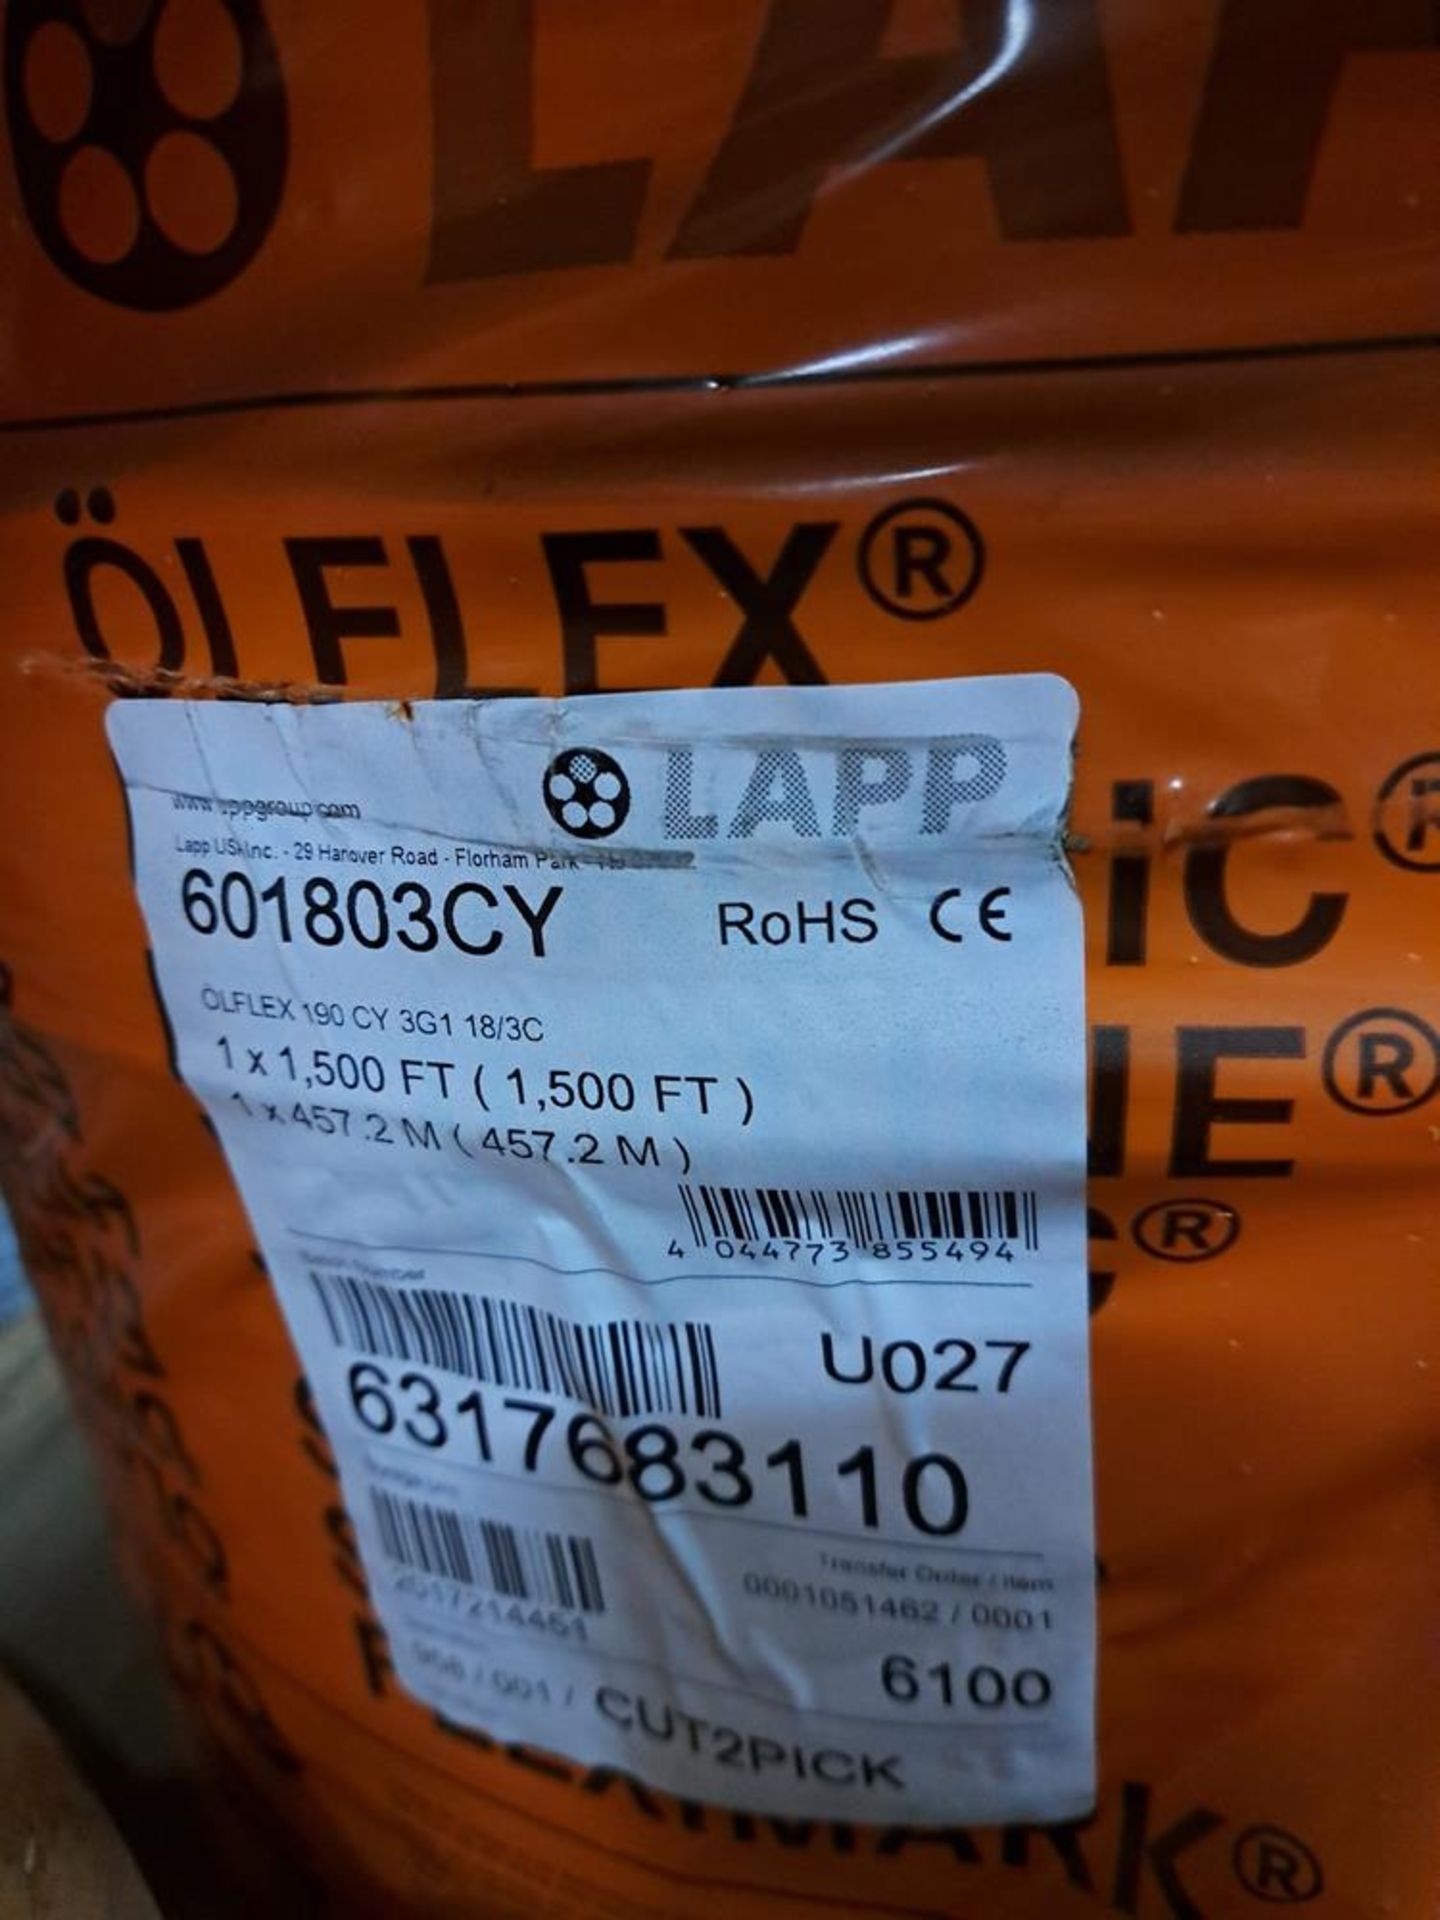 Lot of Olflex 190 CY 3G1 18/3C, (3) spools, 1,500 ft, 1,500 ft, 1,500 ft (Located in Sandwich, IL) - Image 3 of 5